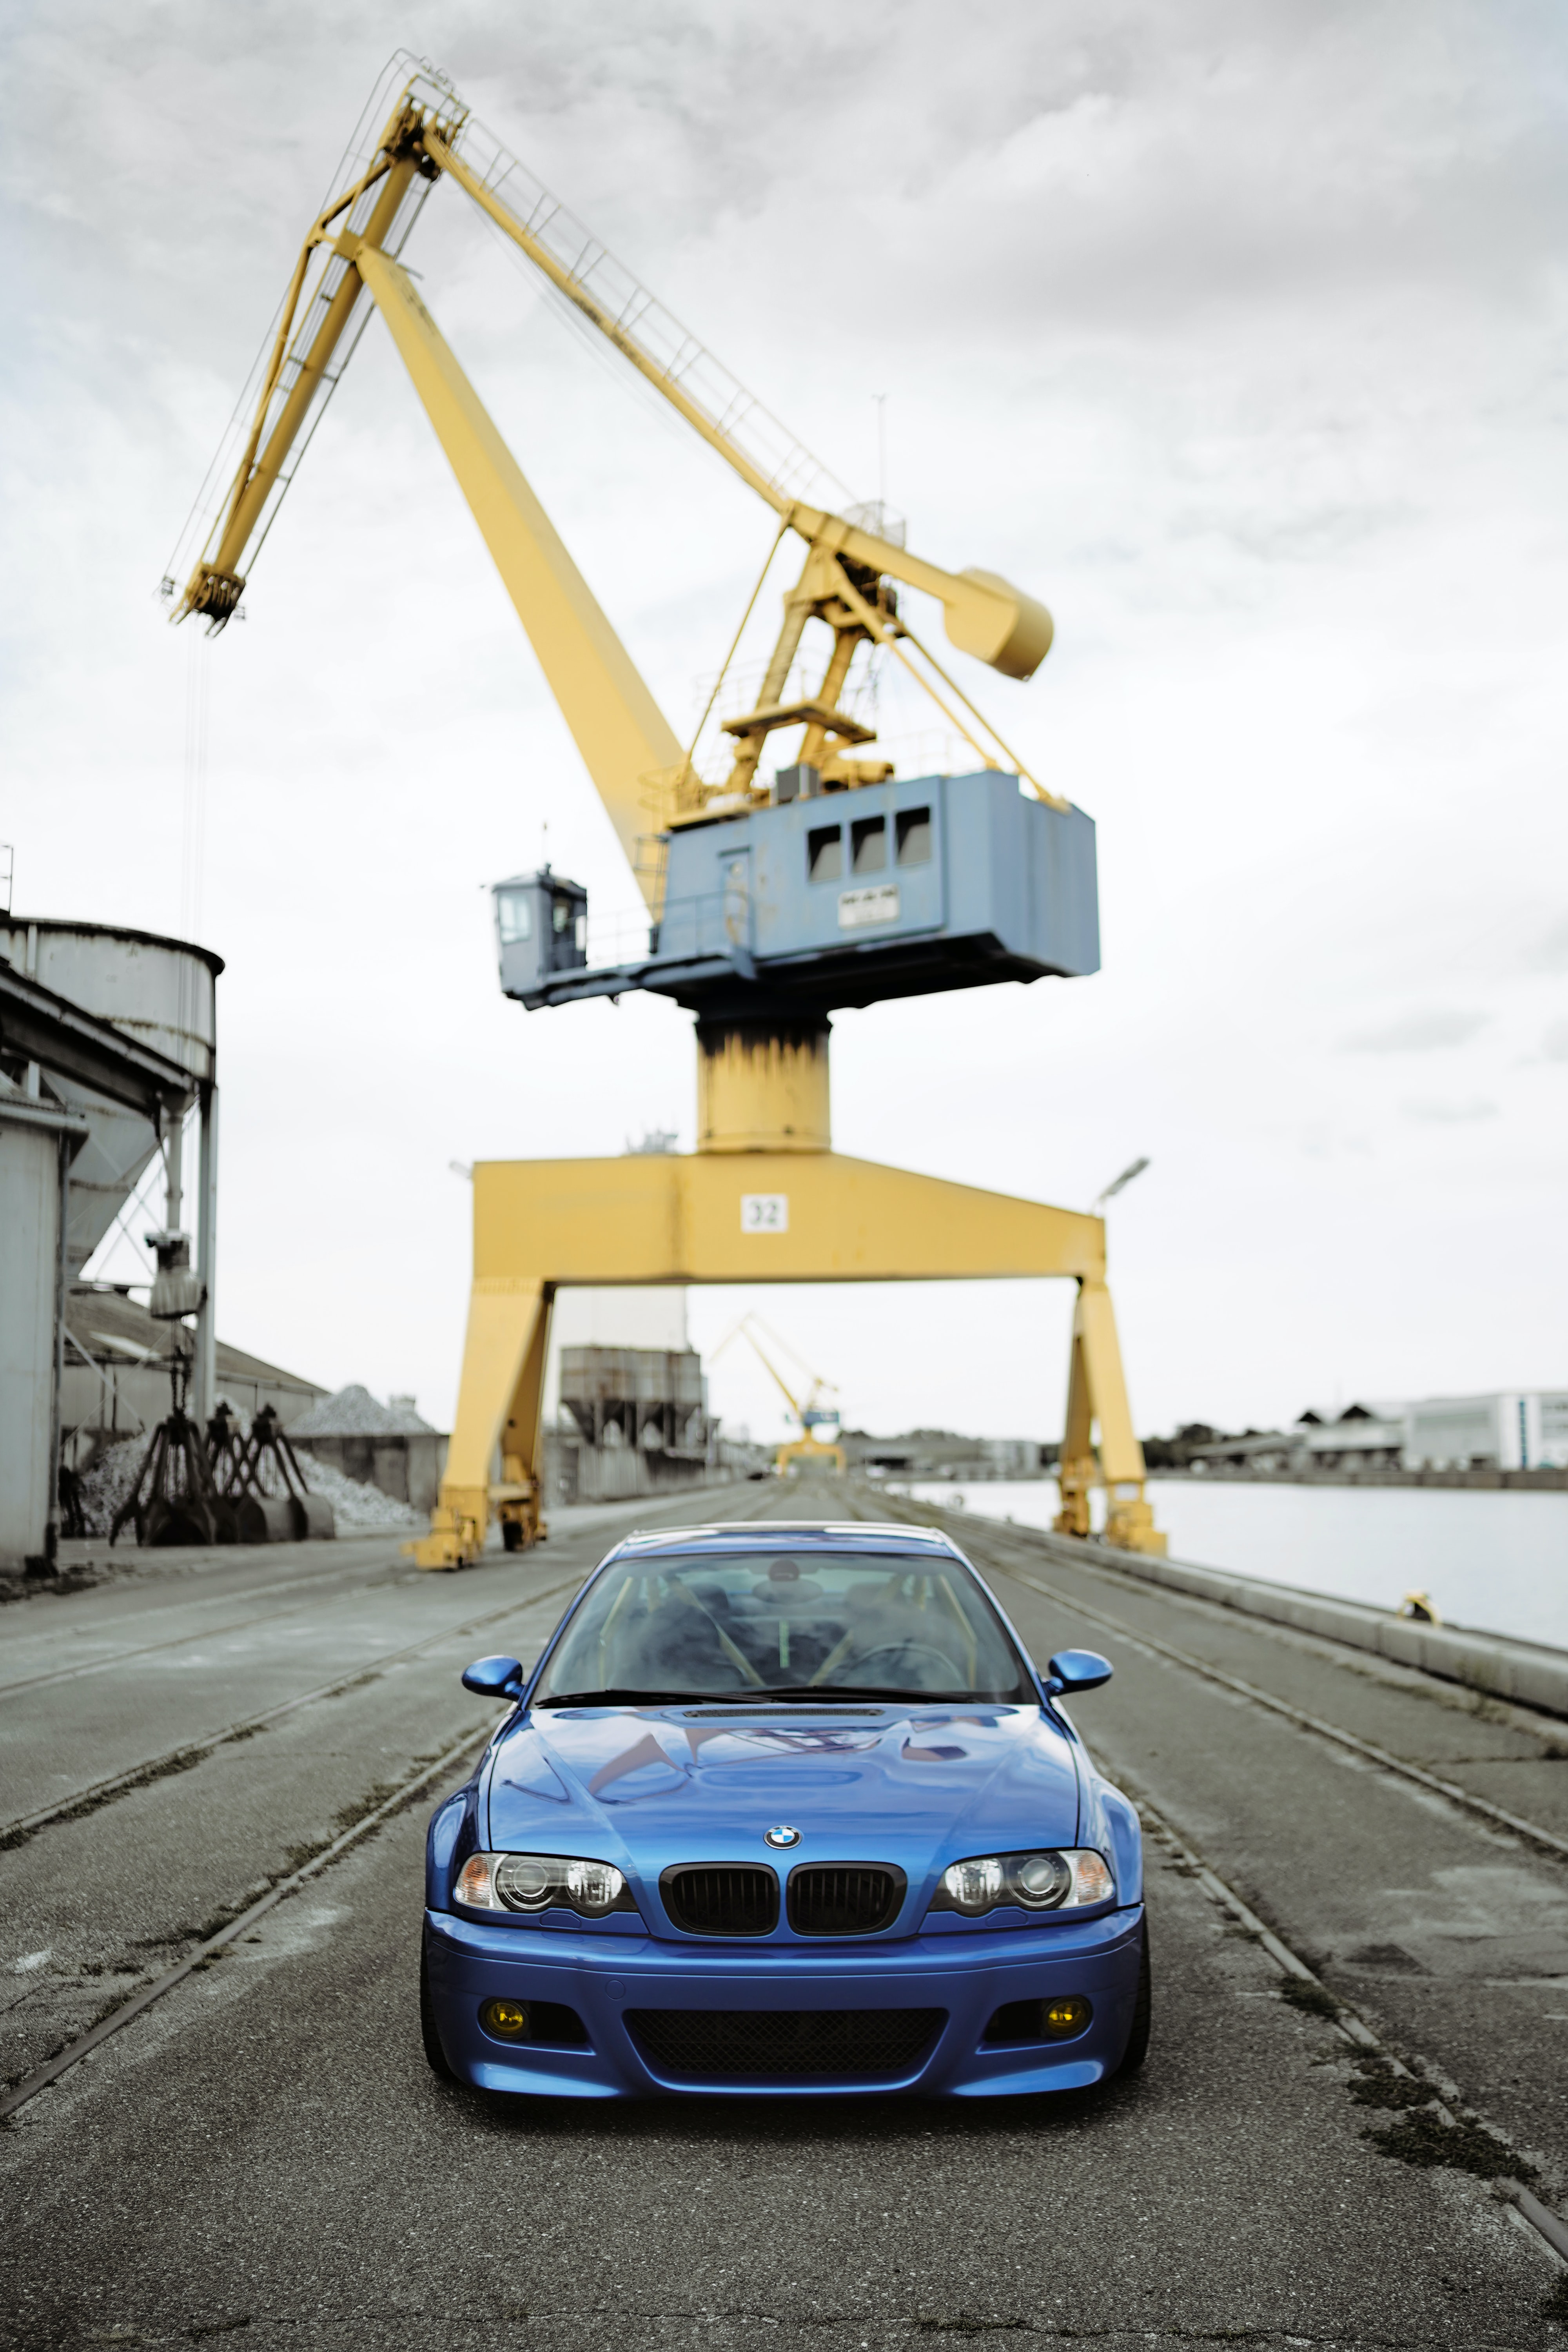 bmw, front view, cars, blue, road, car Full HD